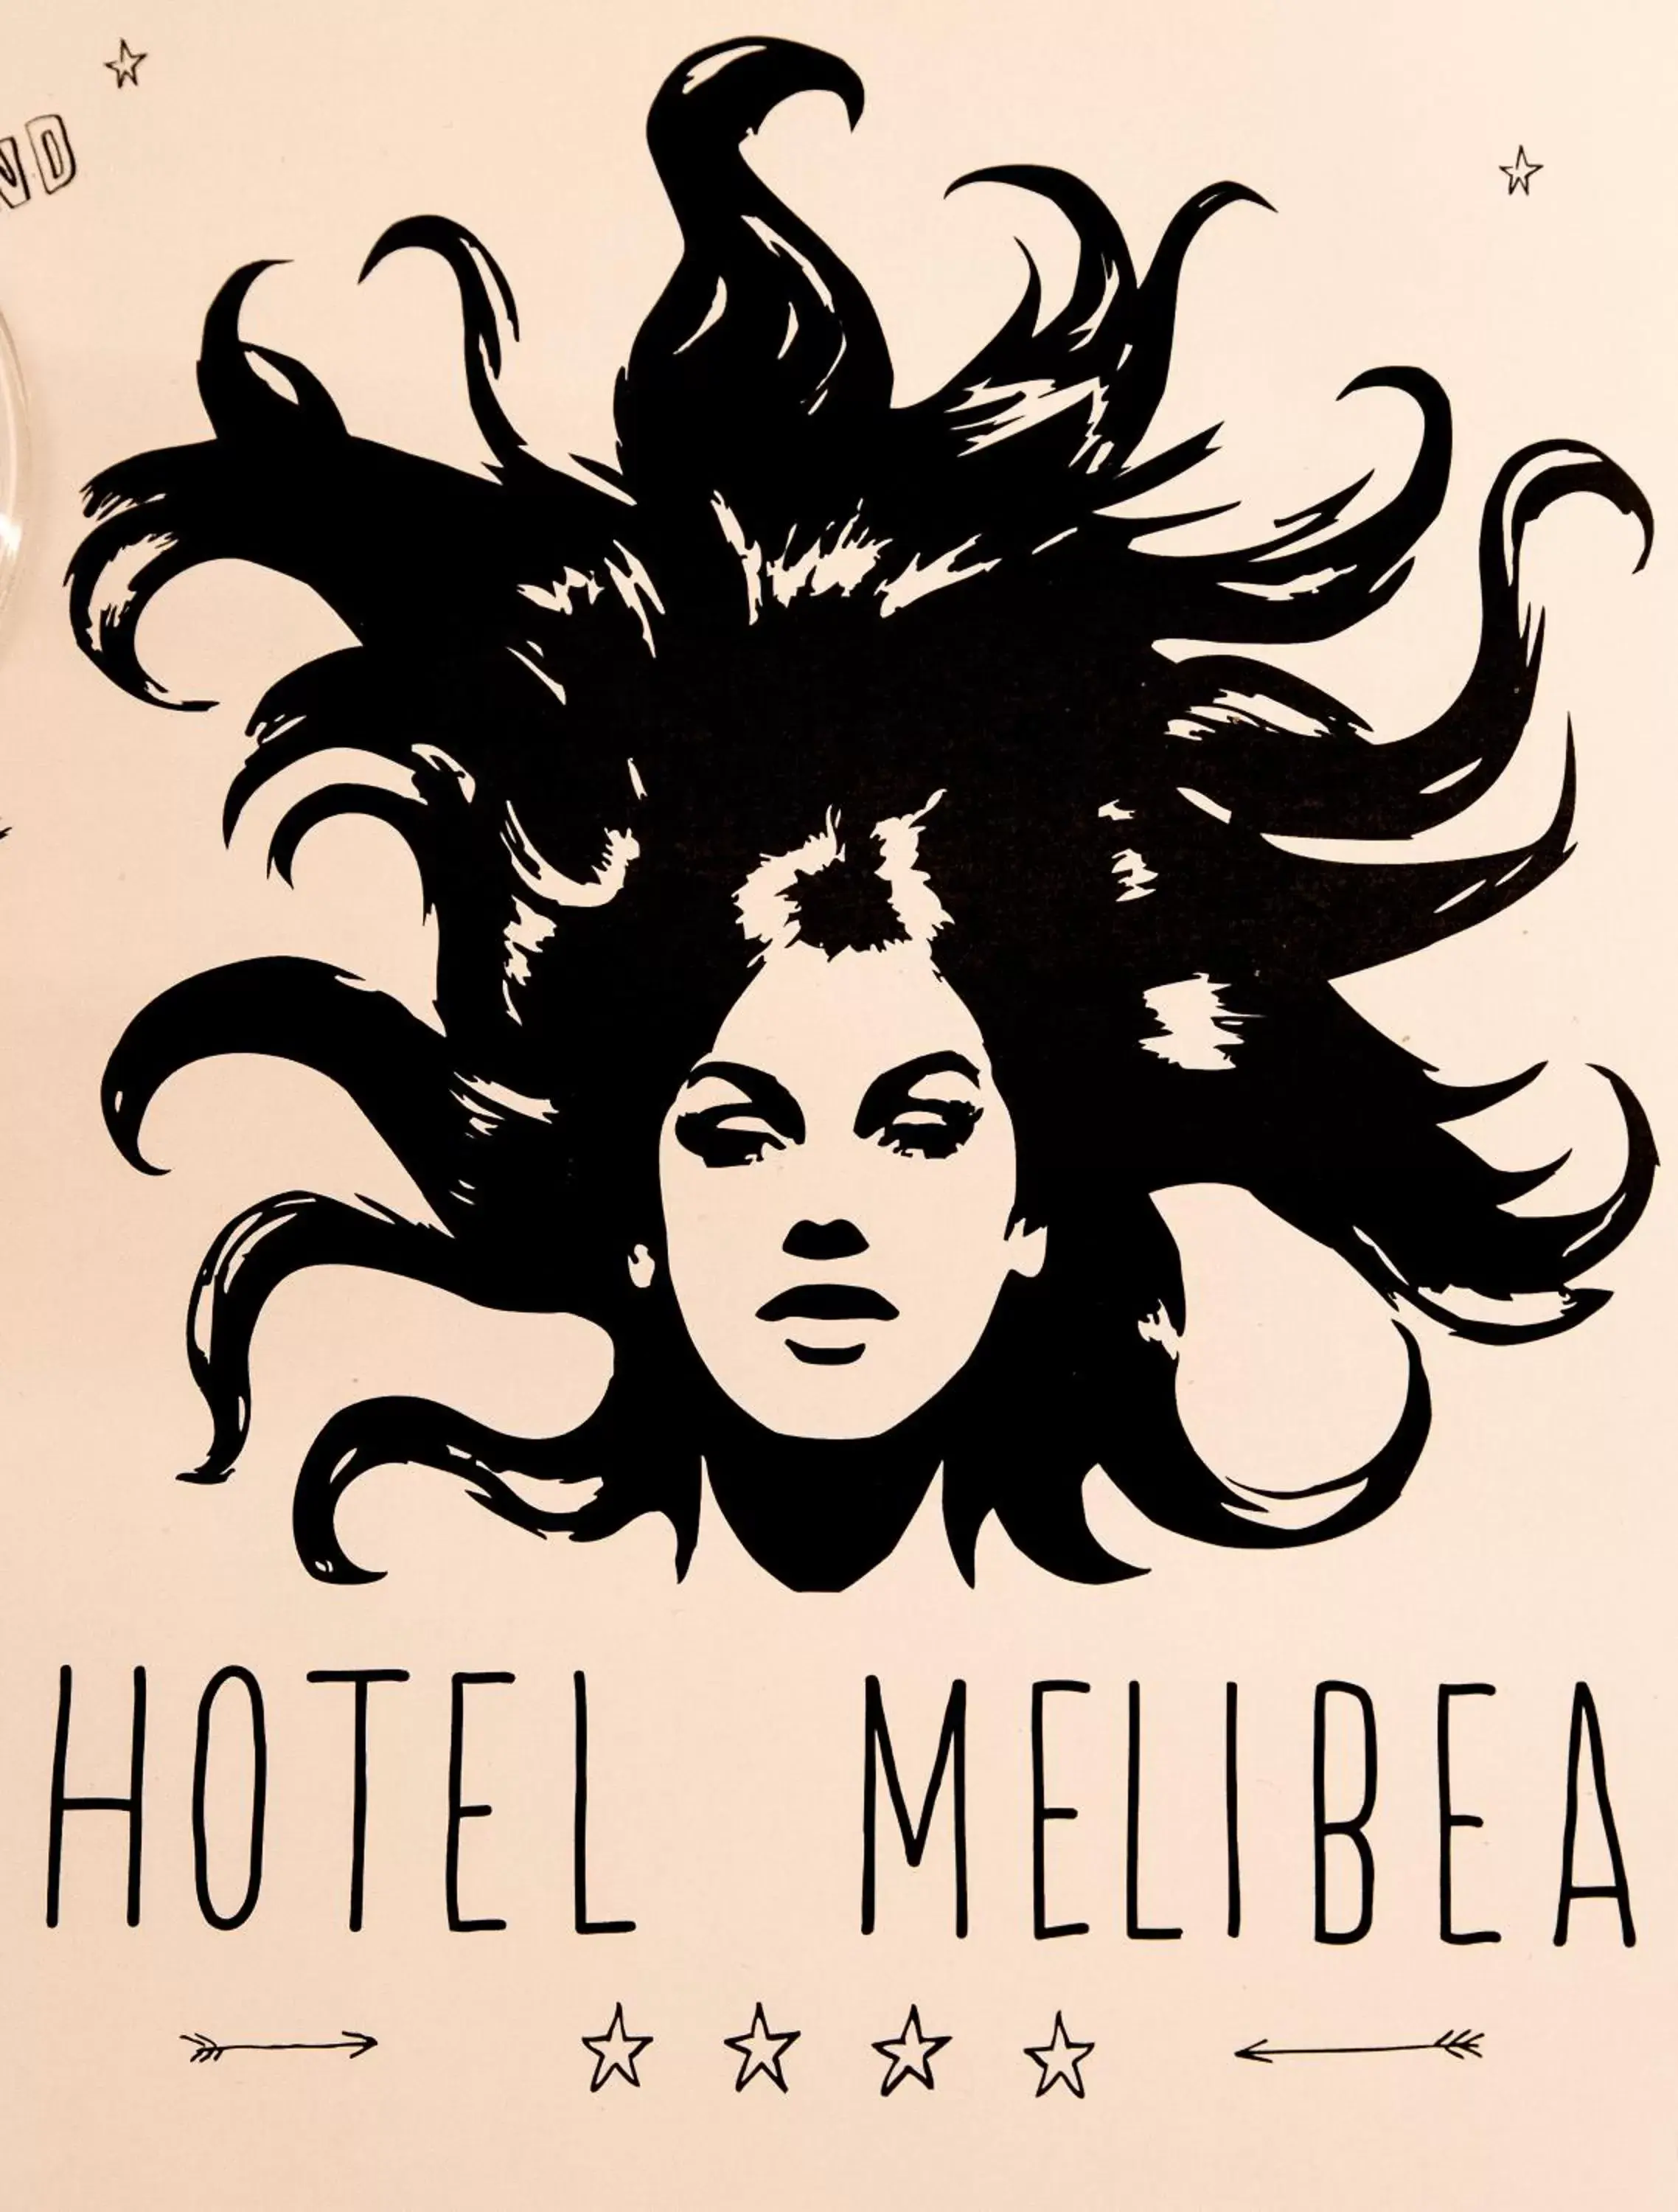 Logo/Certificate/Sign in Hotel Melibea by gaiarooms